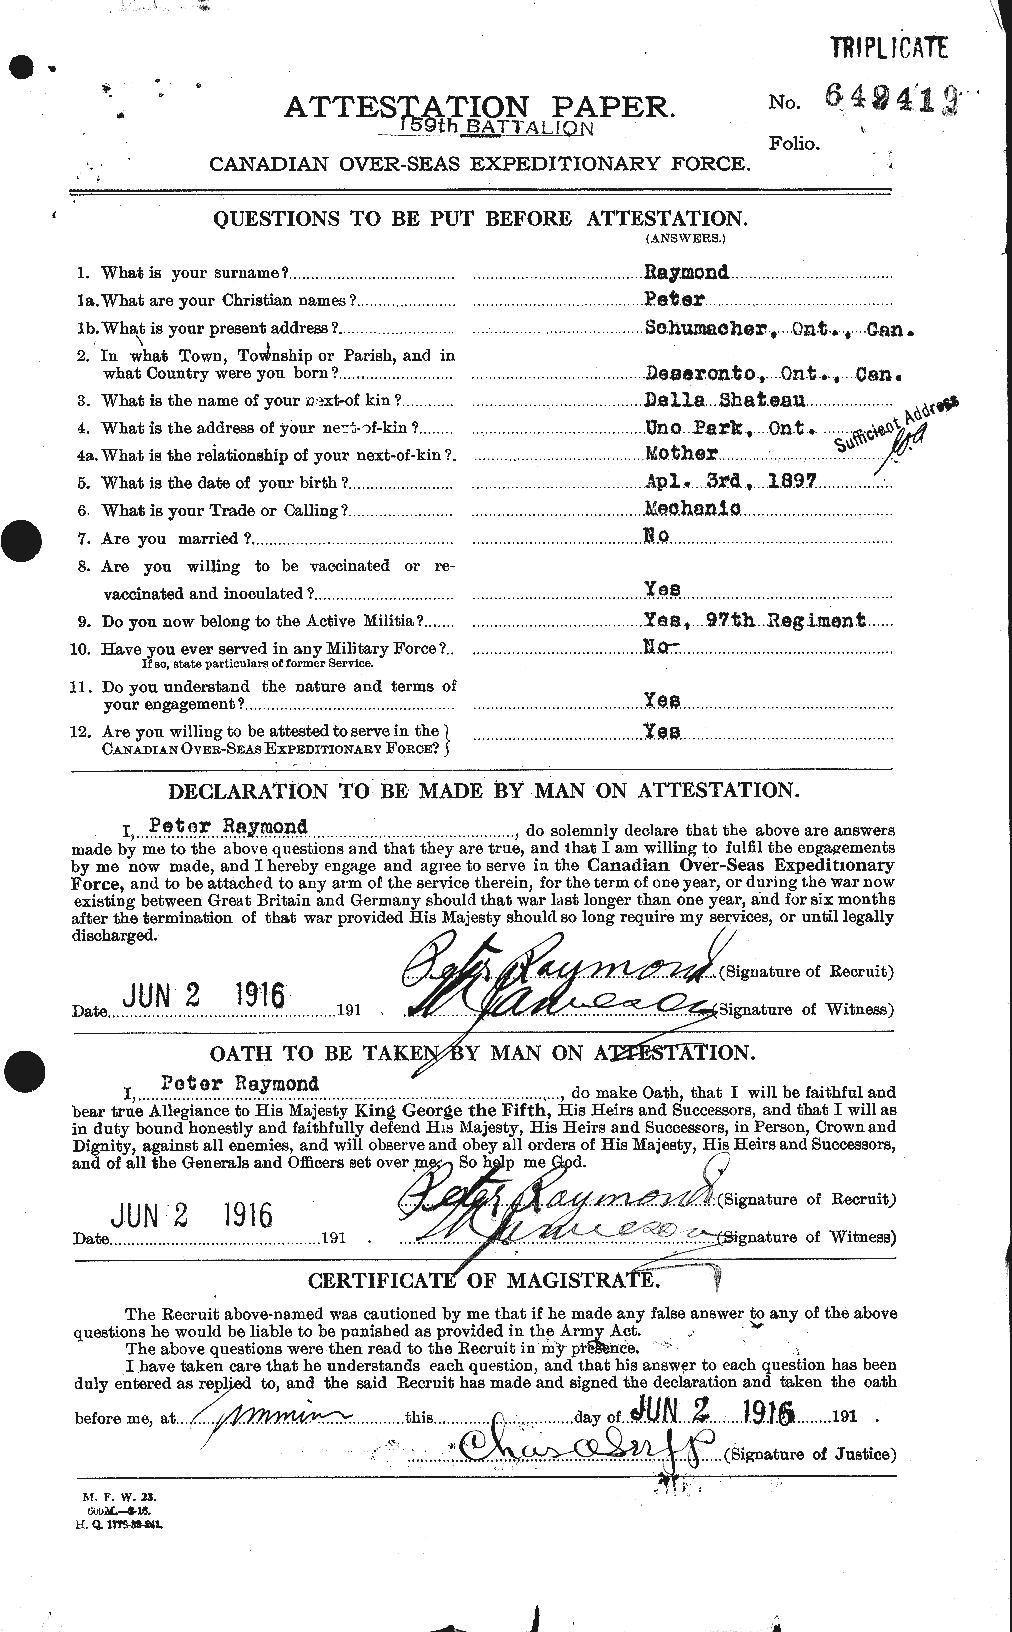 Personnel Records of the First World War - CEF 595440a